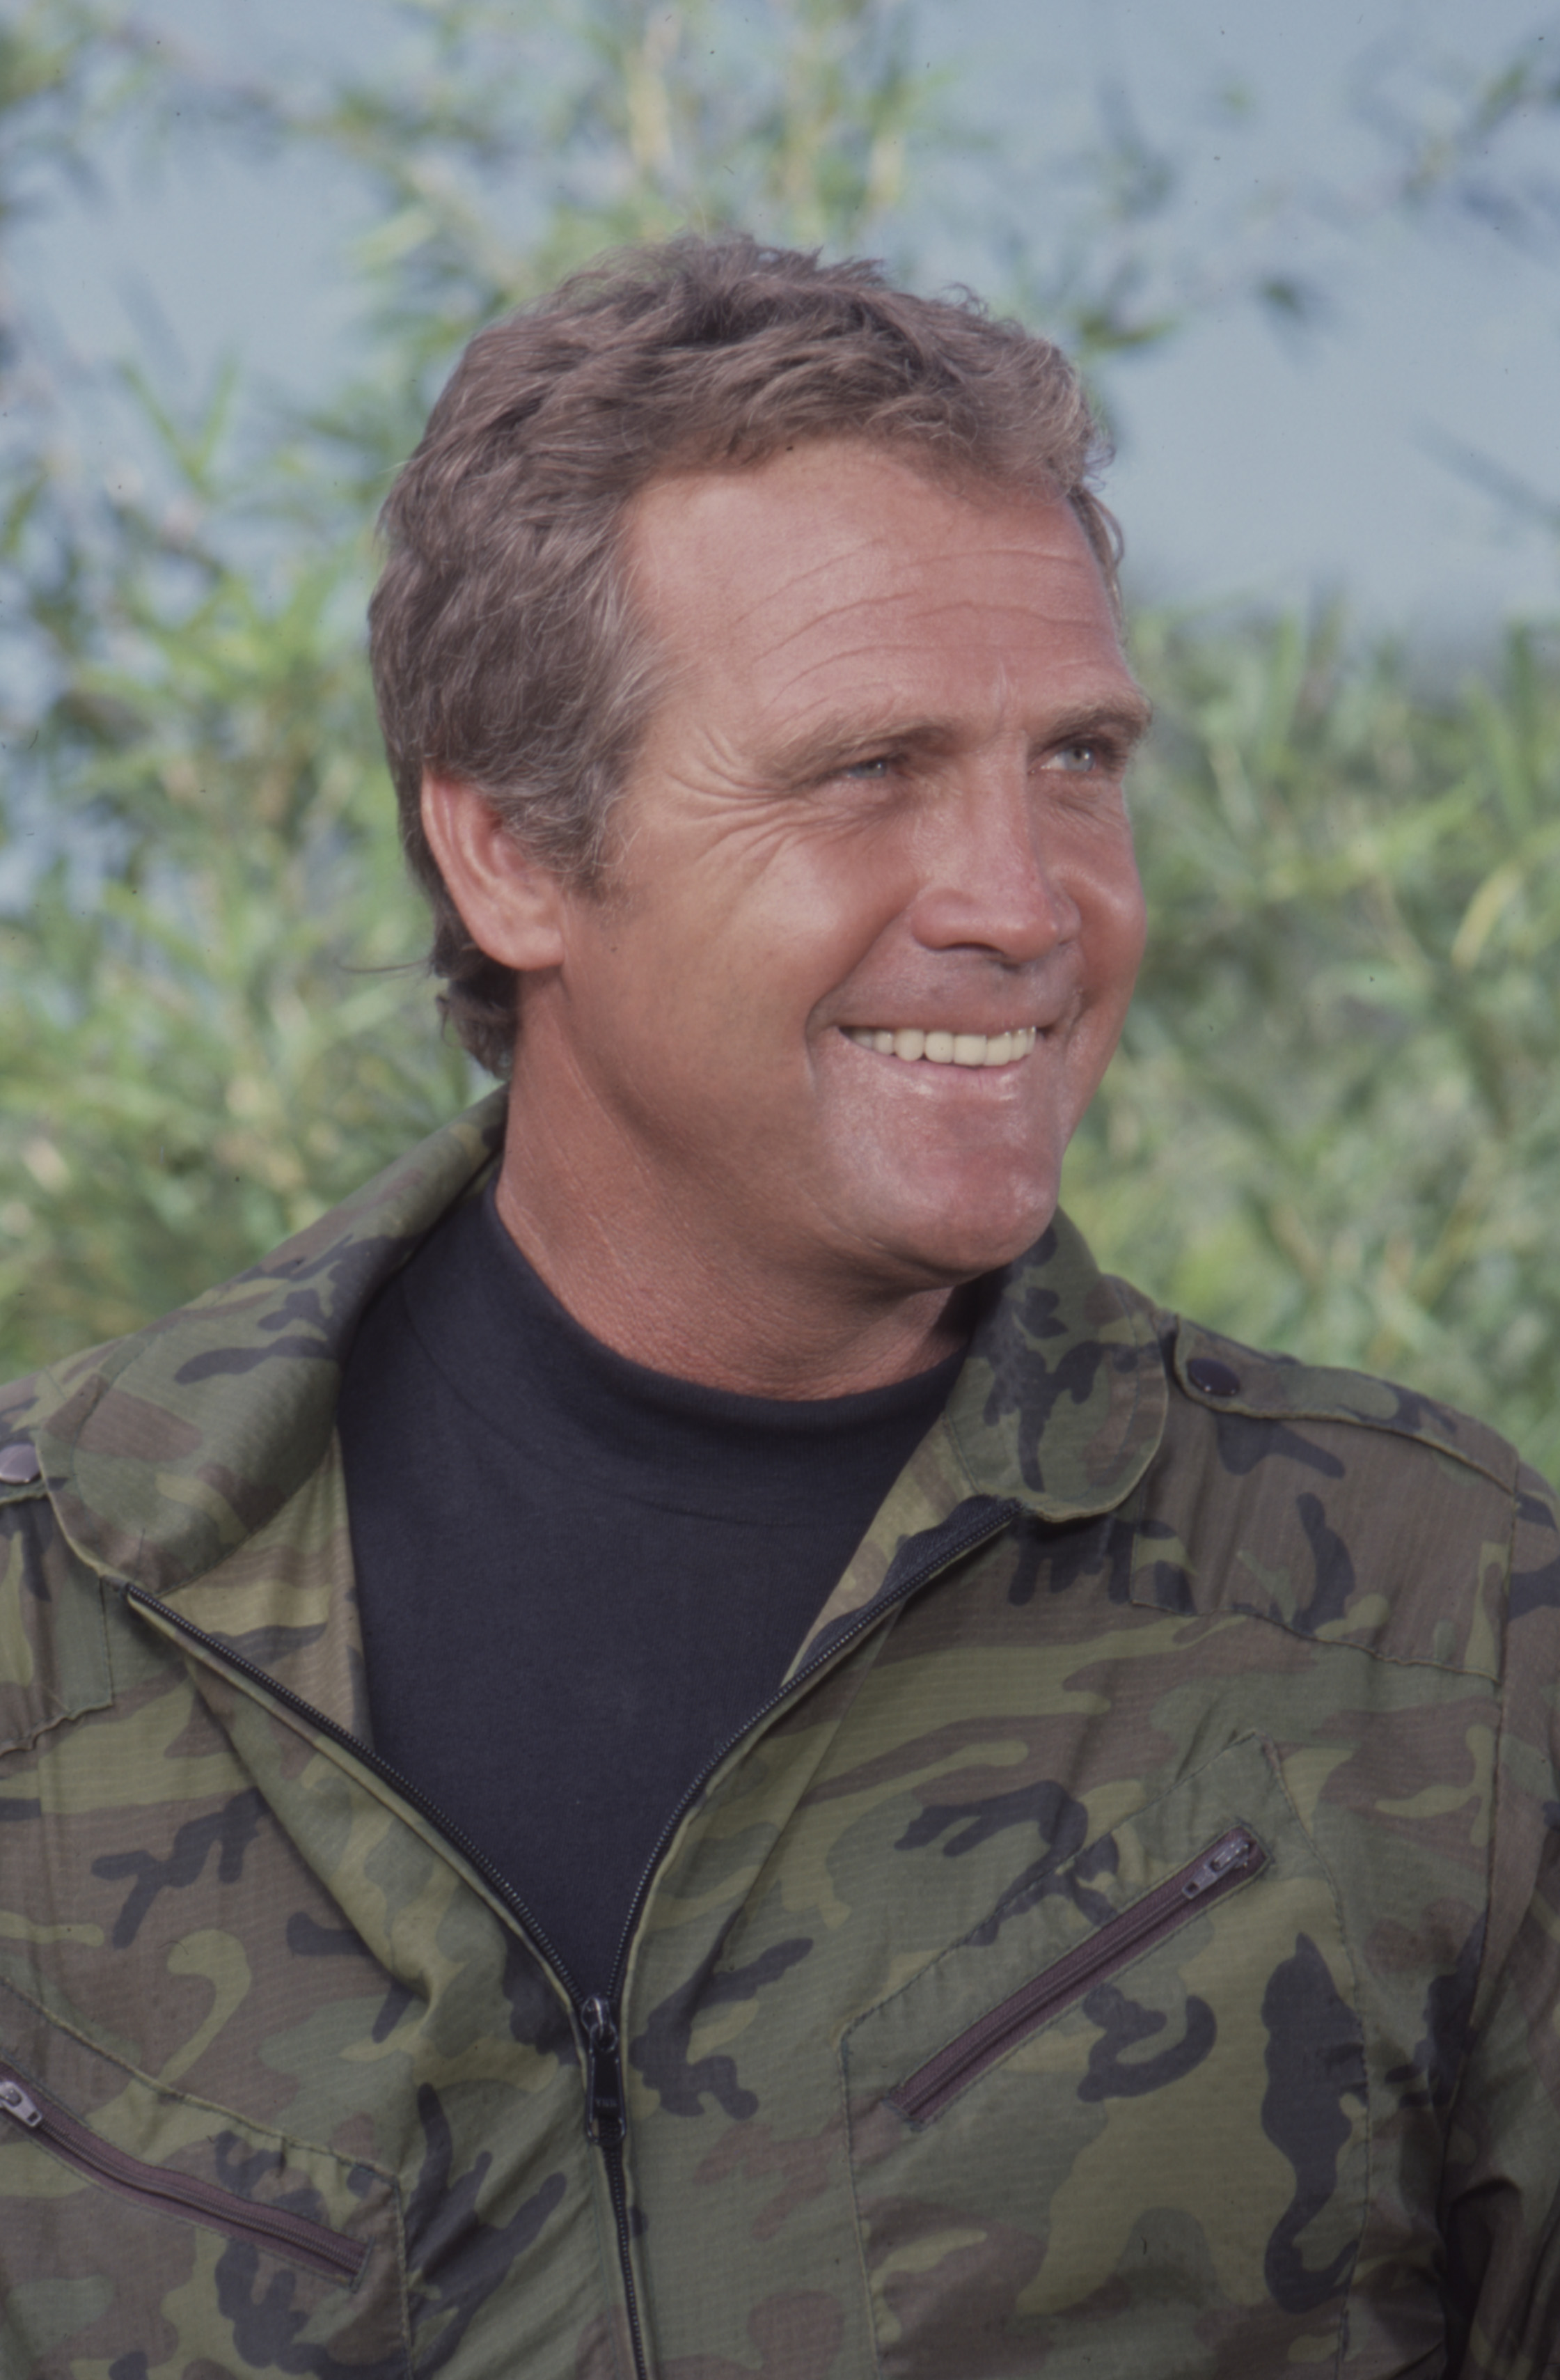 1983: Lee Majors appearing in "Devil's Island" episode of "The Fall Guy" in 1983 | Source: Getty Images